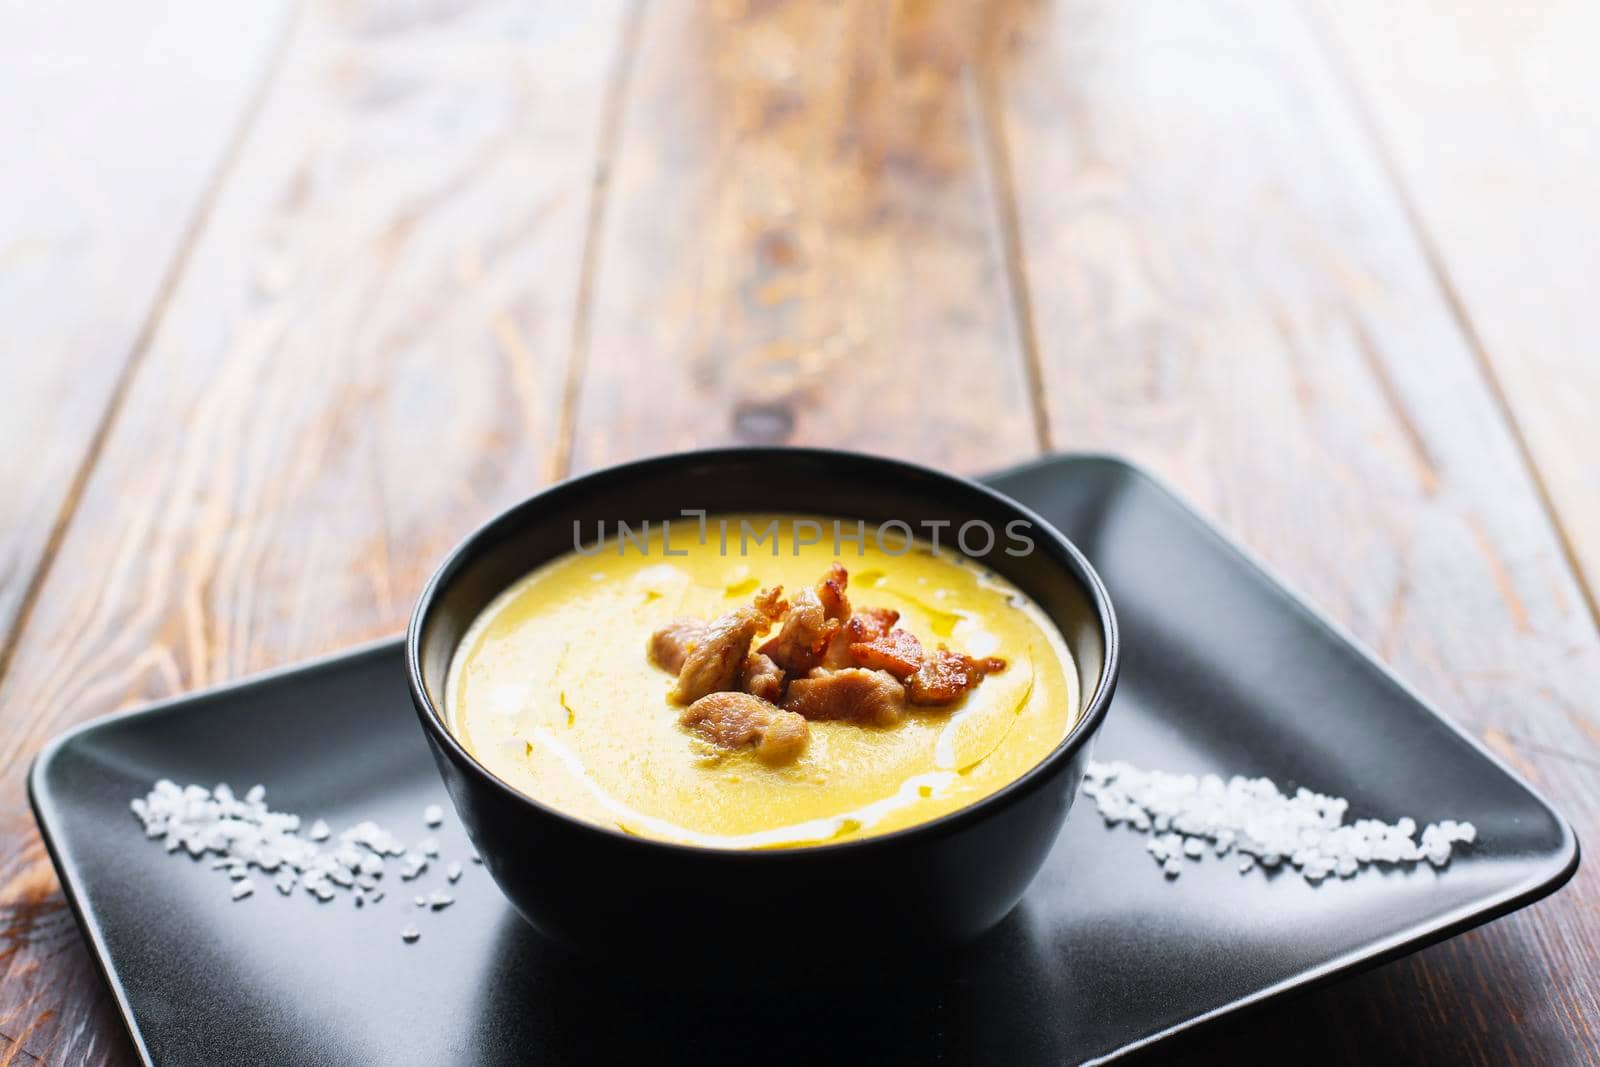 Pumpkin vegetable cream soup on black bowl with pork or chicken meat. Wooden background